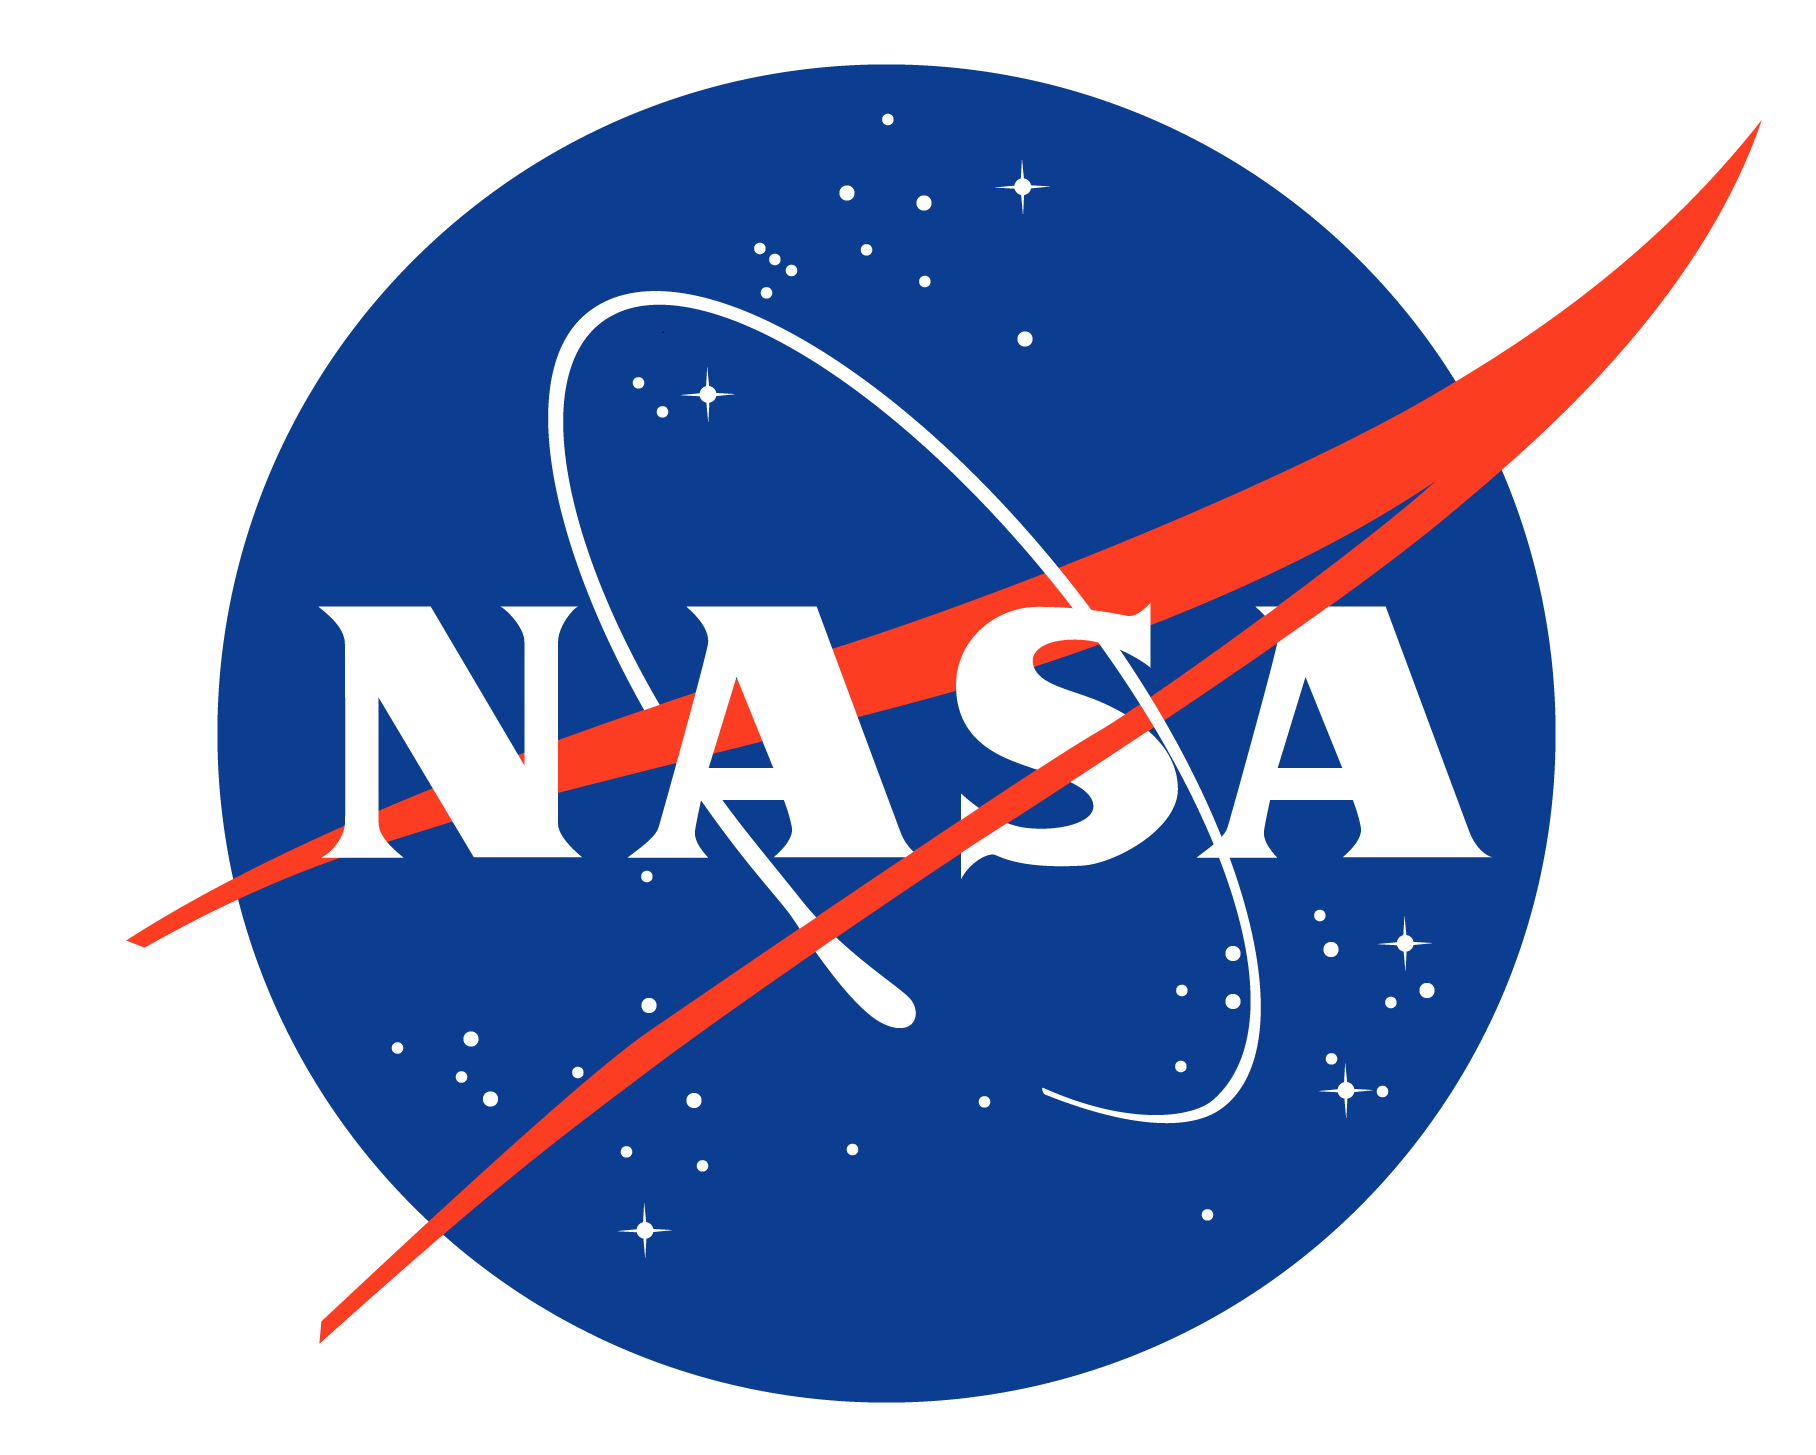 The NASA insignia. A blue circle with the word NASA in white across the blue circle. There is also a red vector across the blue circle.